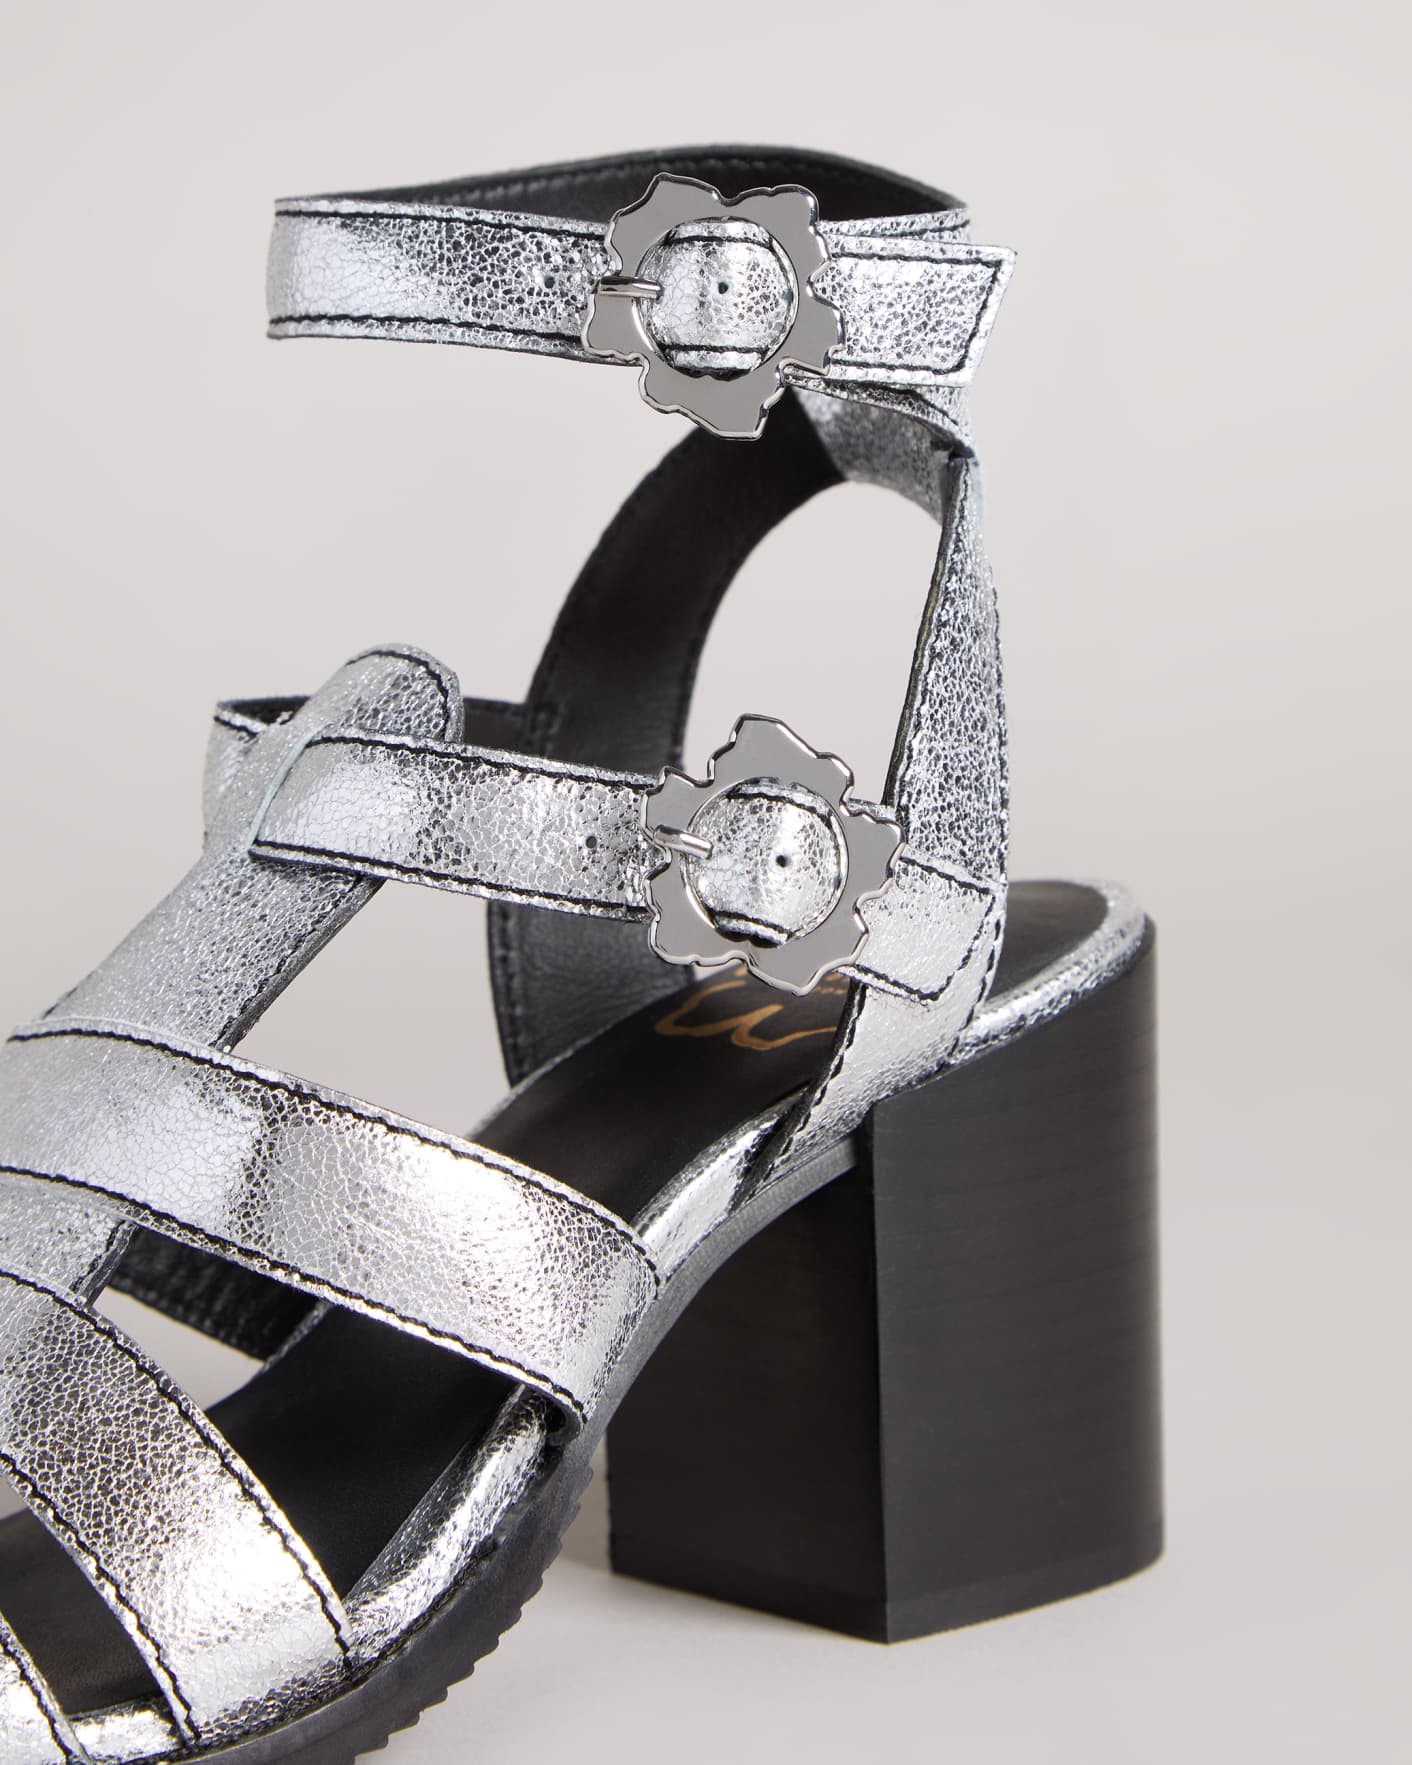 Silver Strappy Block Heeled Crinkled Leather Sandals Ted Baker